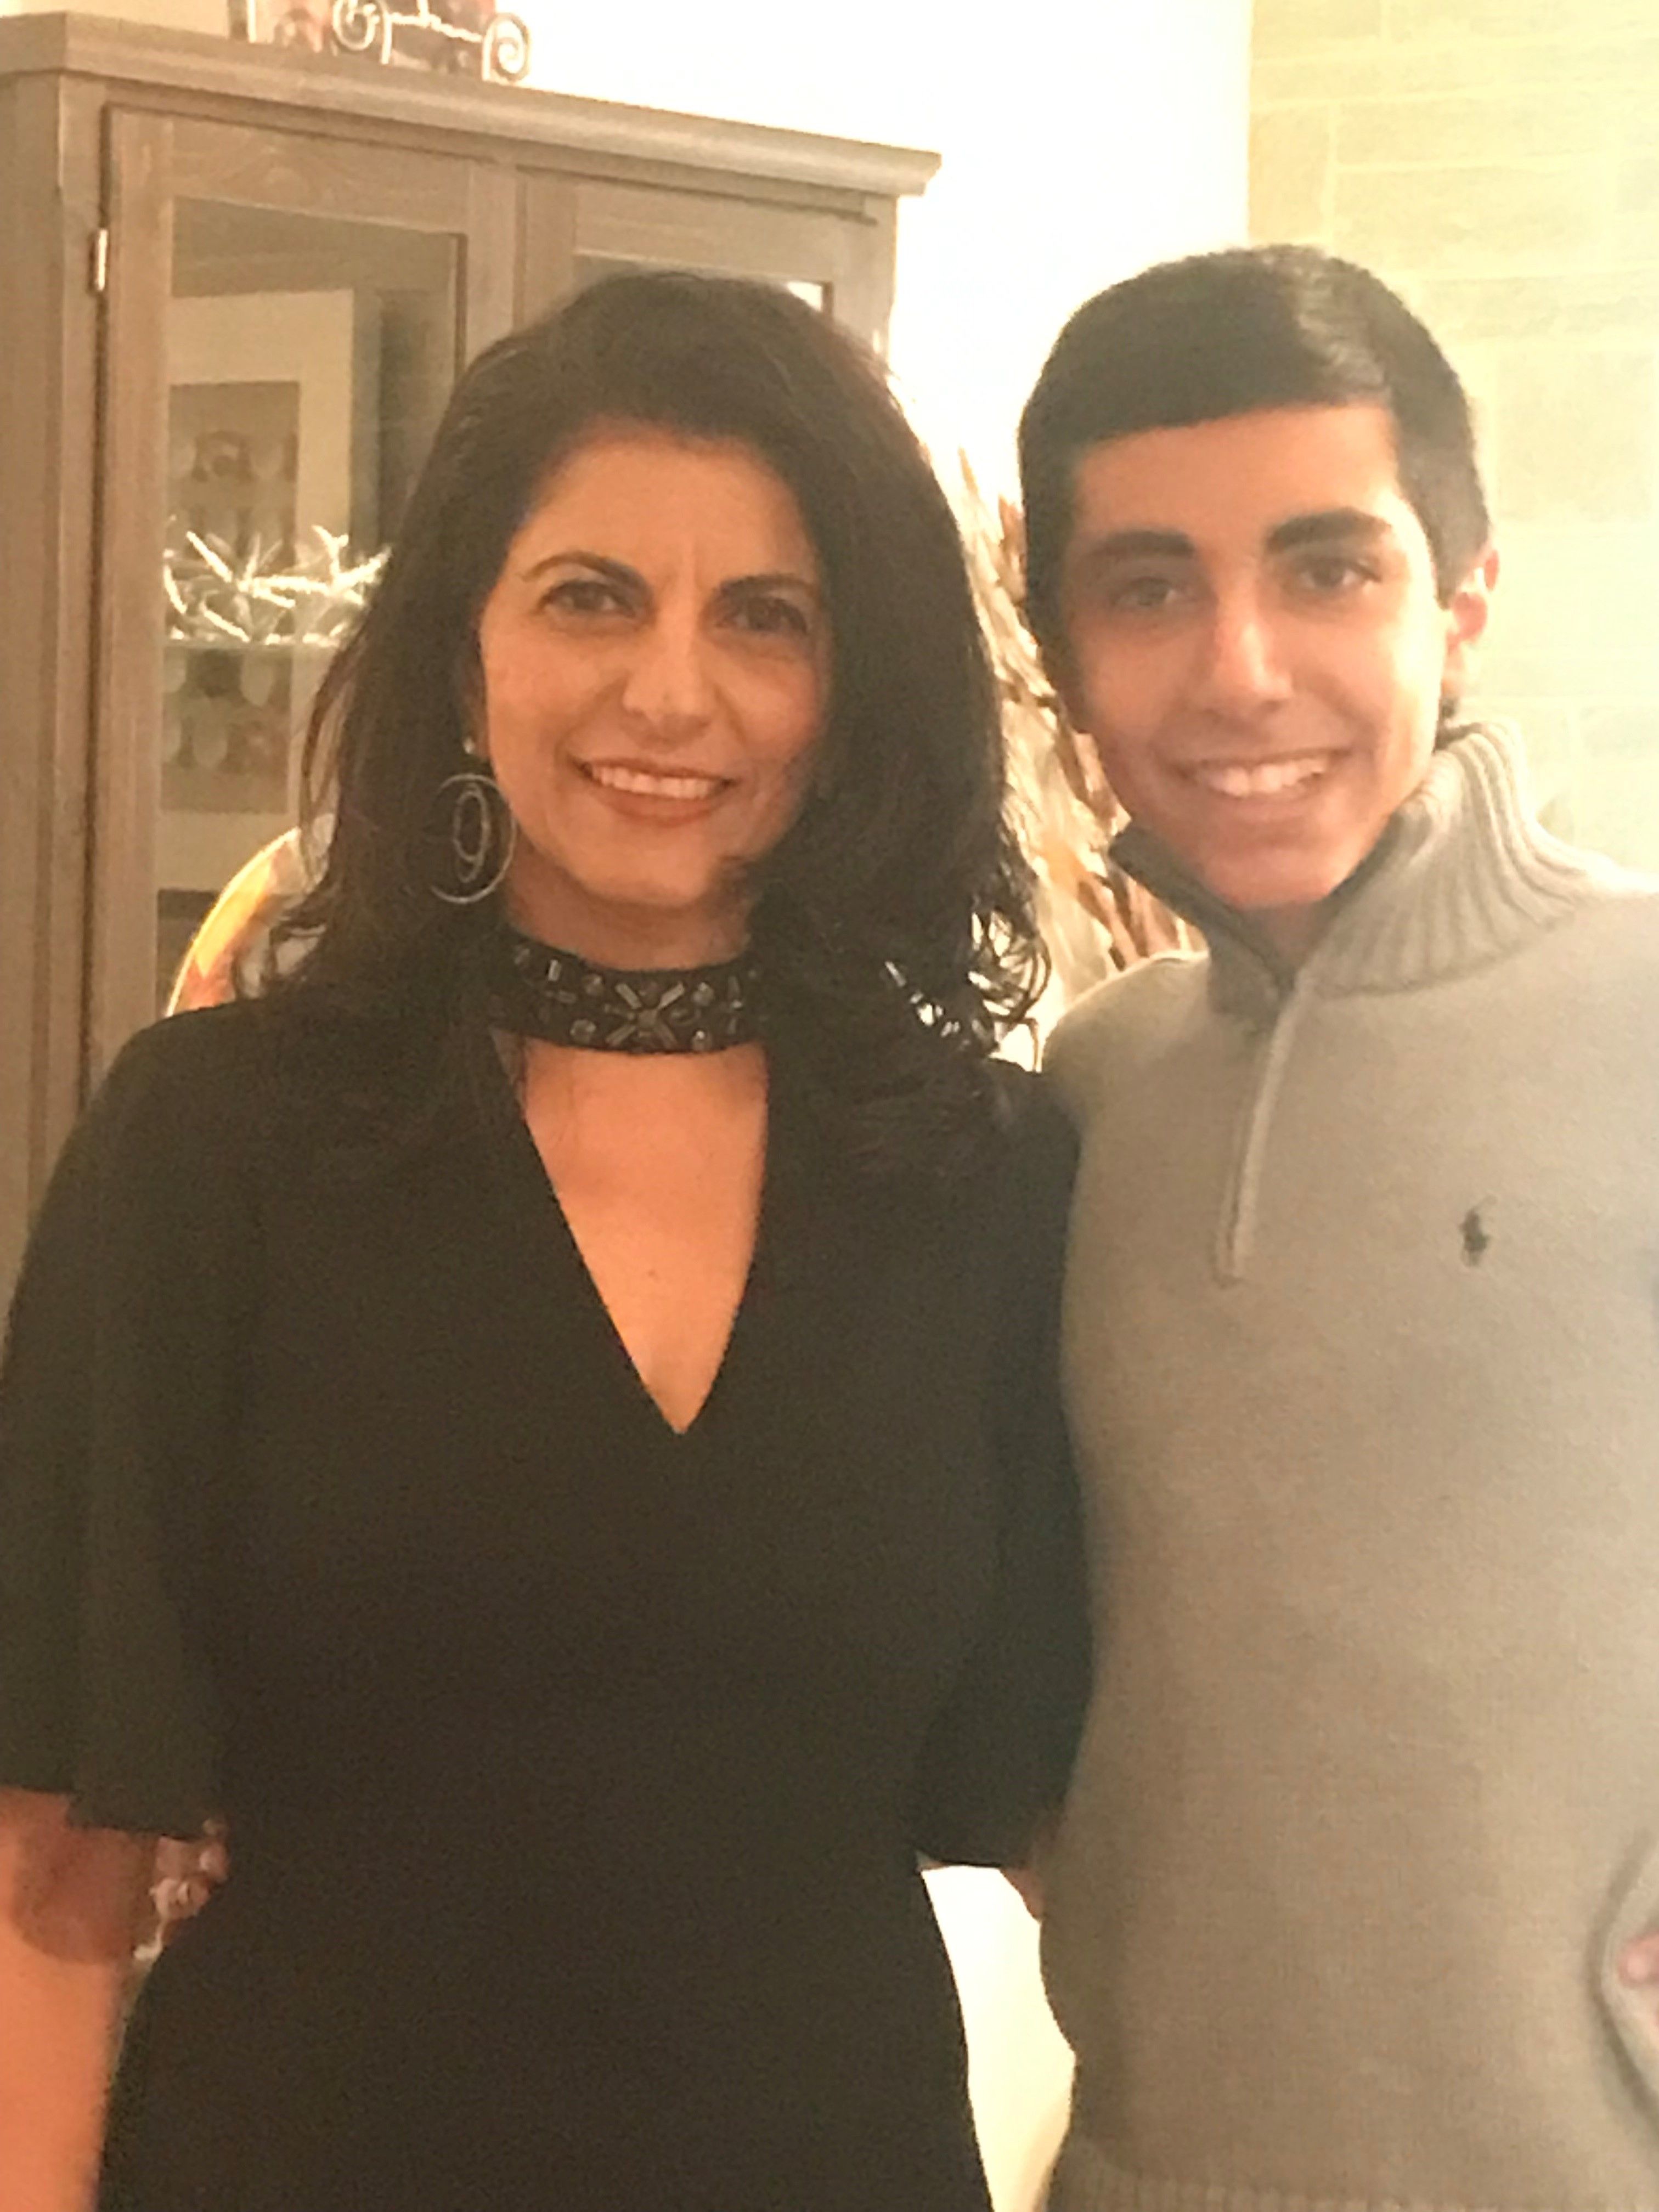 Dr. Shafai and her son